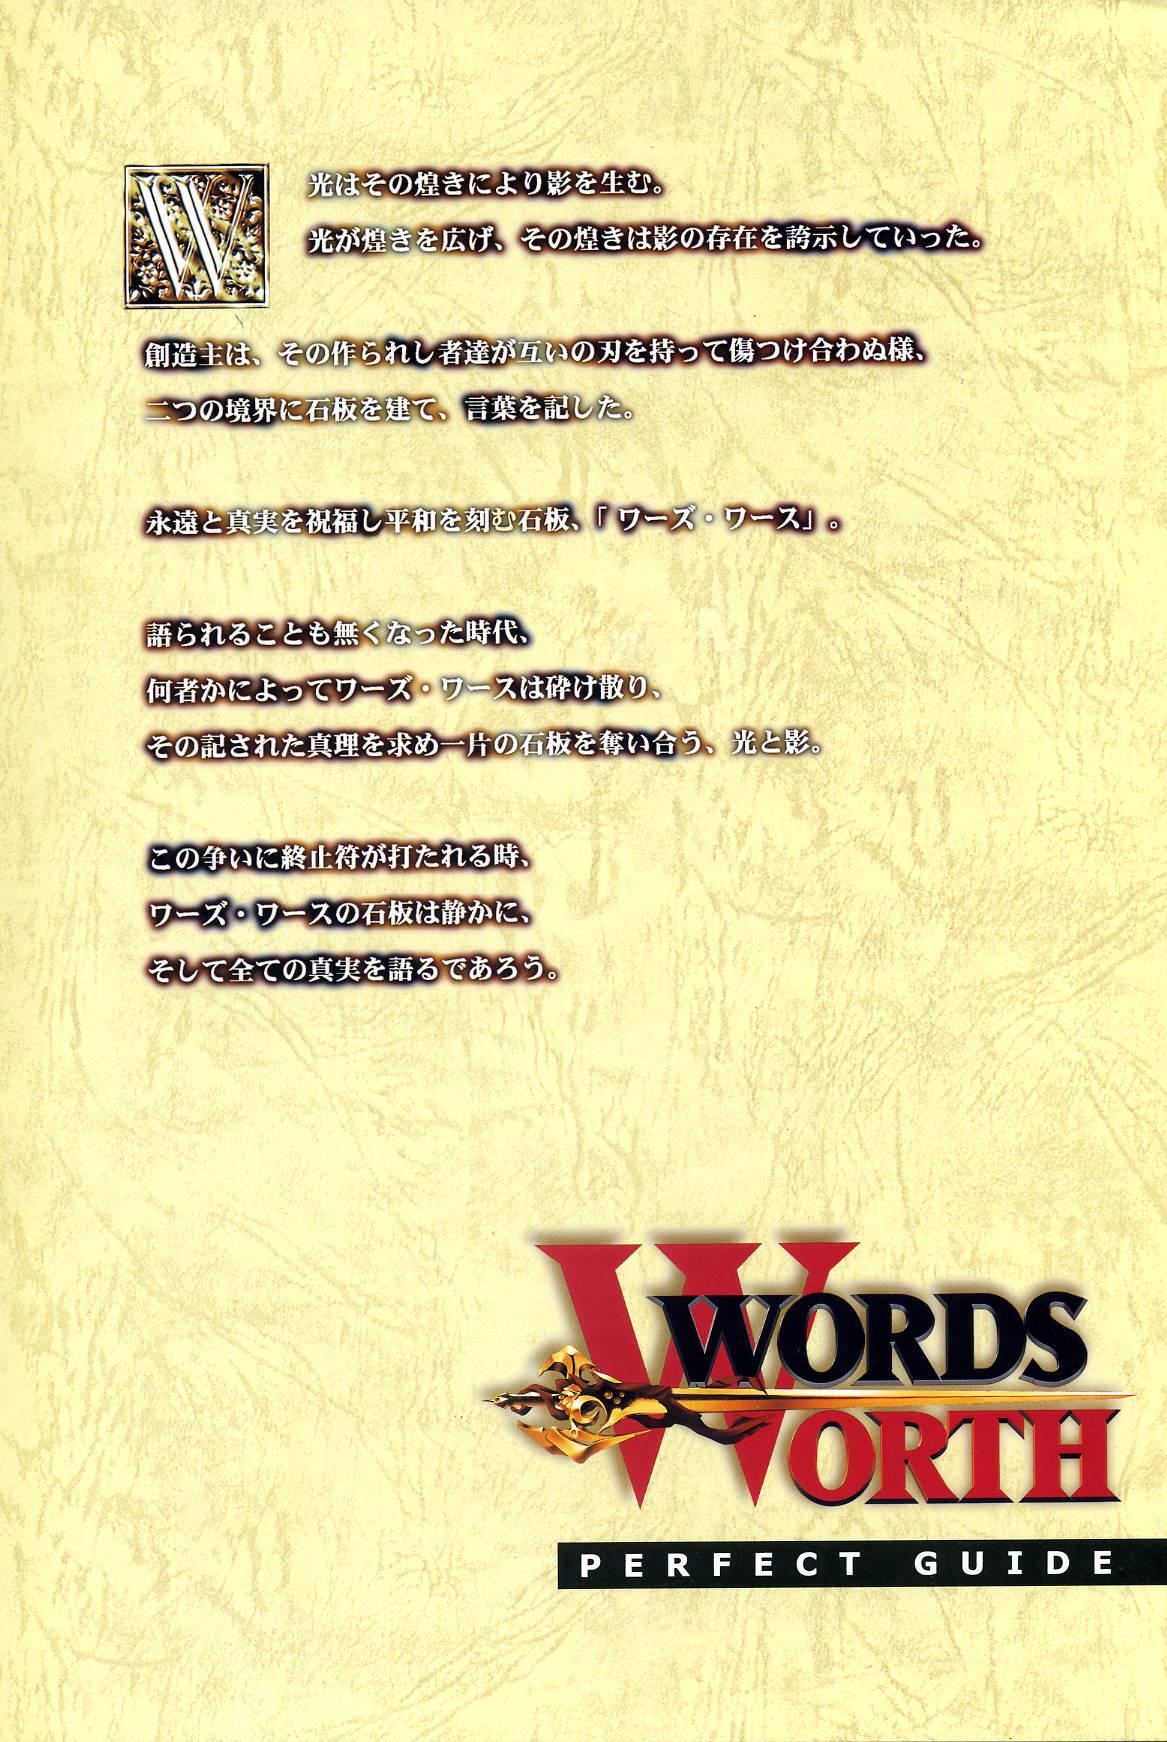 Tongue WORDS WORTH 完全ガイド - Words worth Gay Porn - Page 2